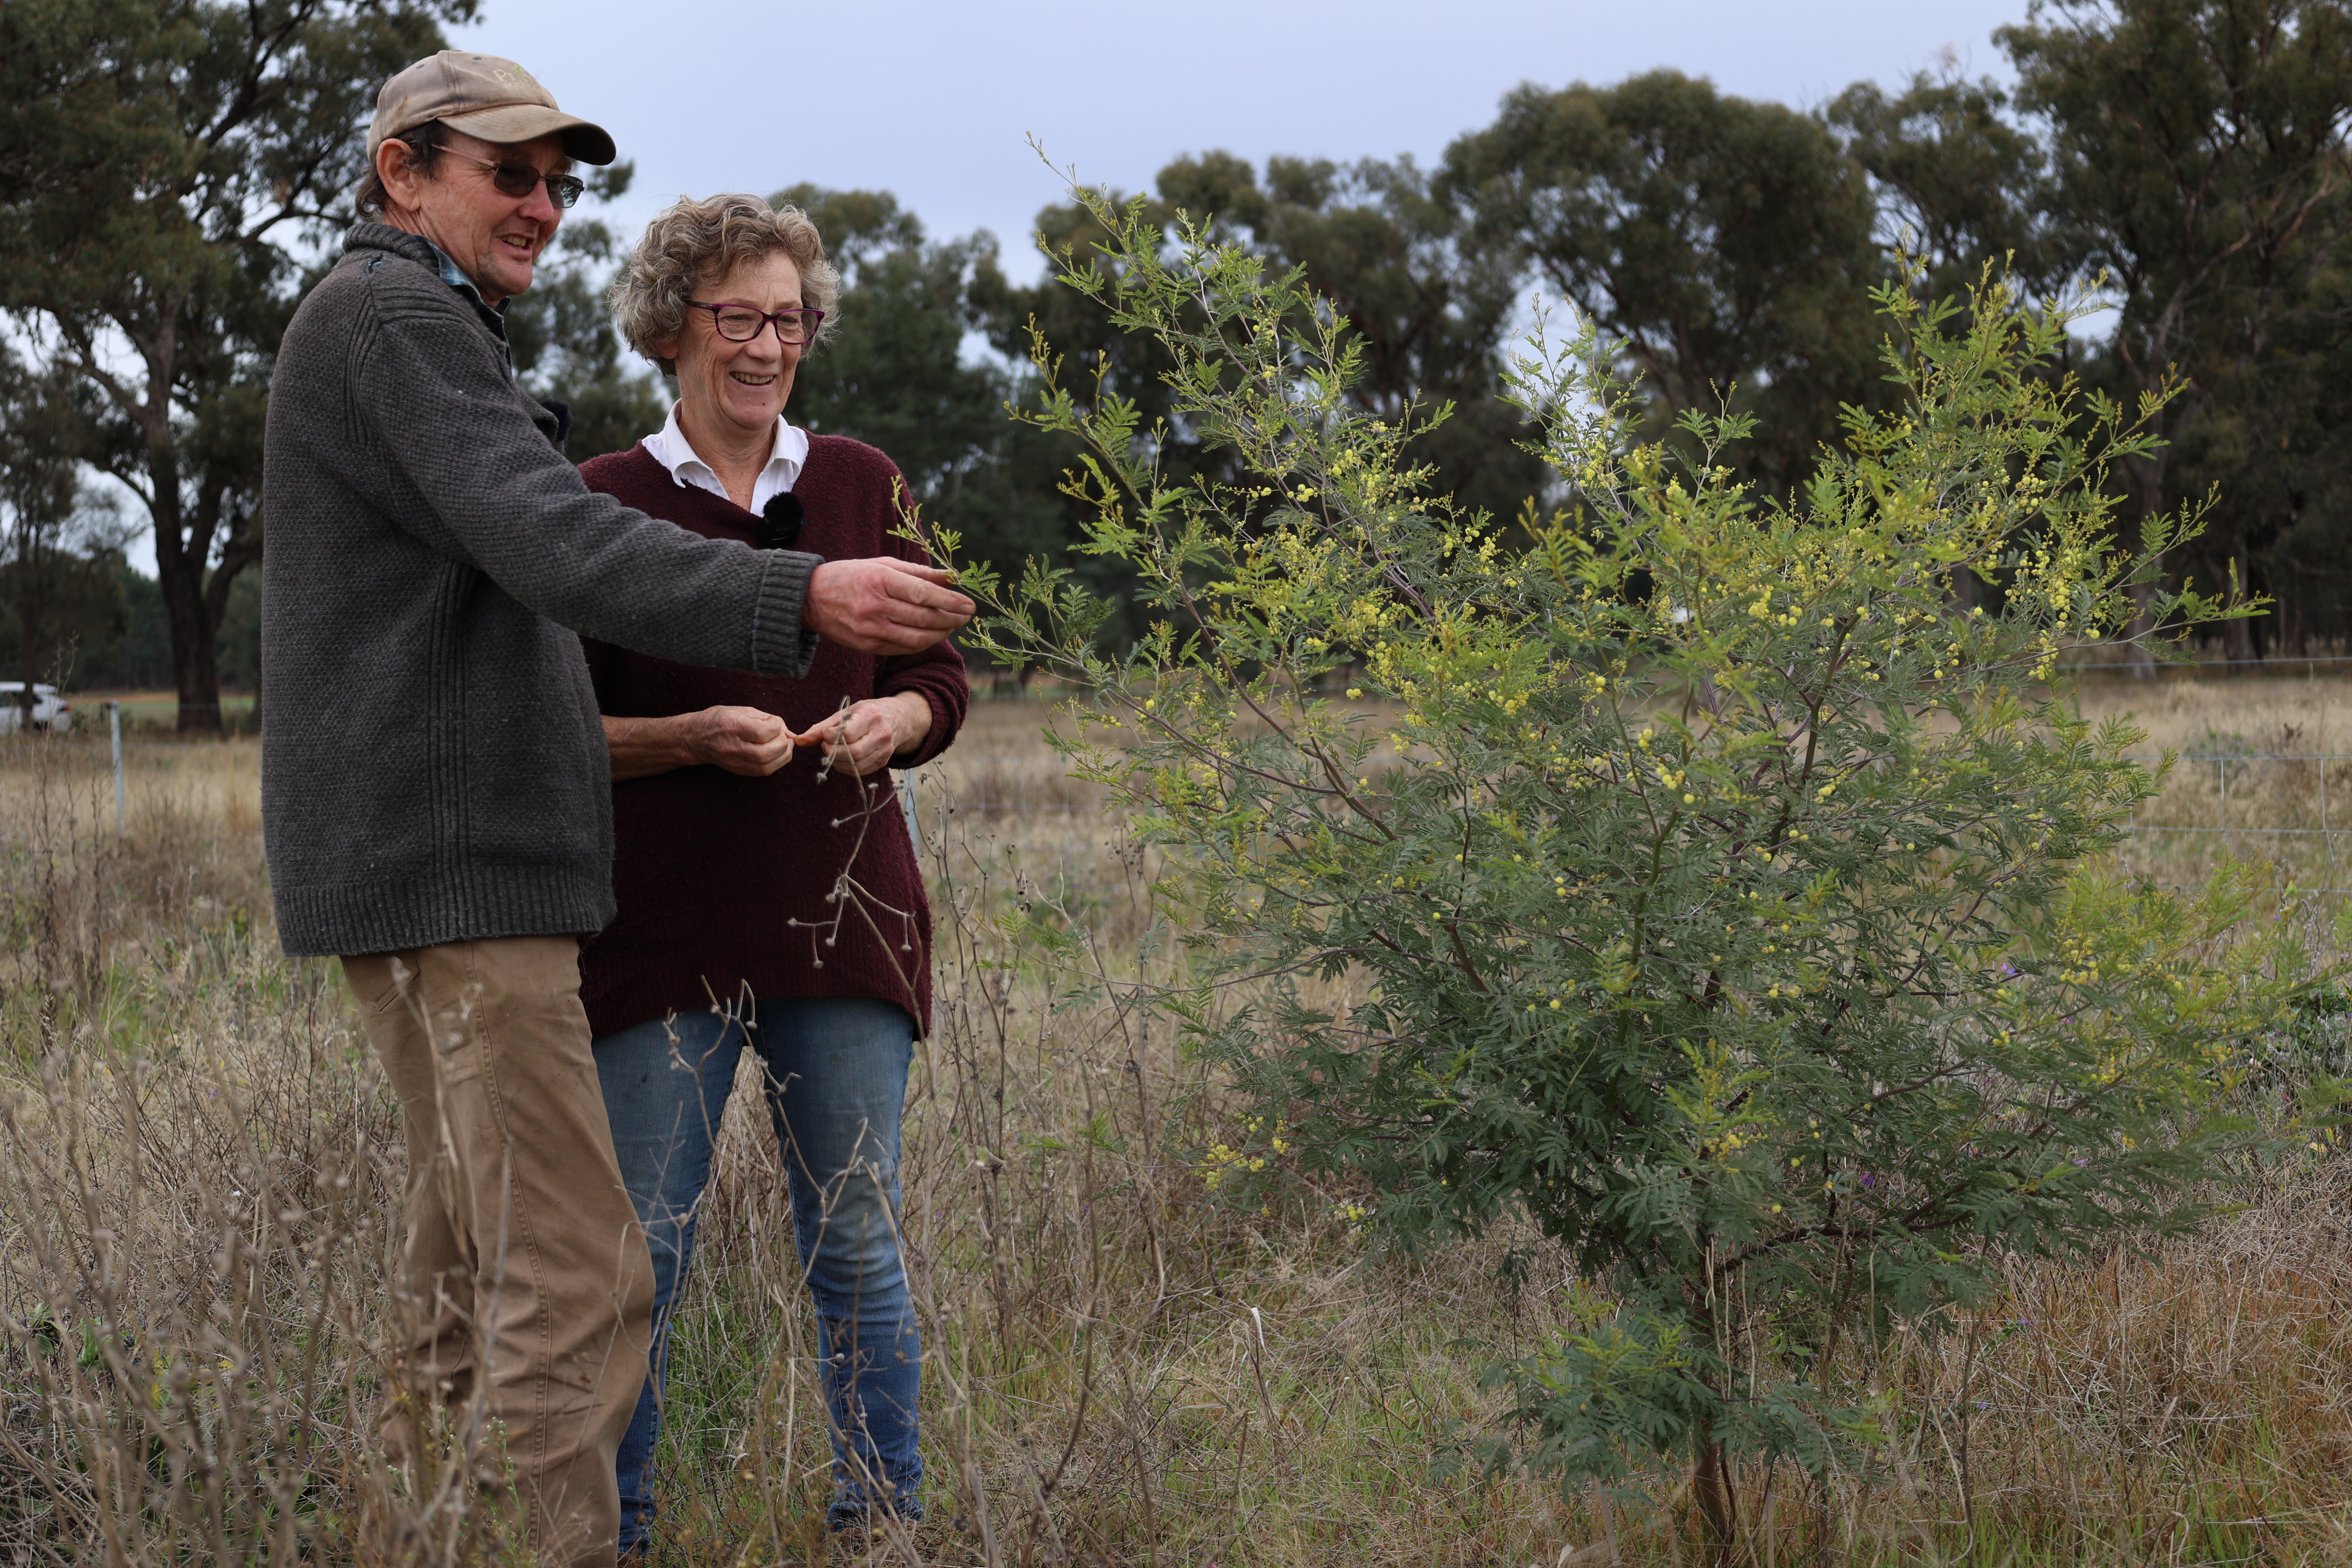 A man wearing sunglasses and a hat whilst holding his arm out, stands beside a woman in a paddock next to a newly planted tree